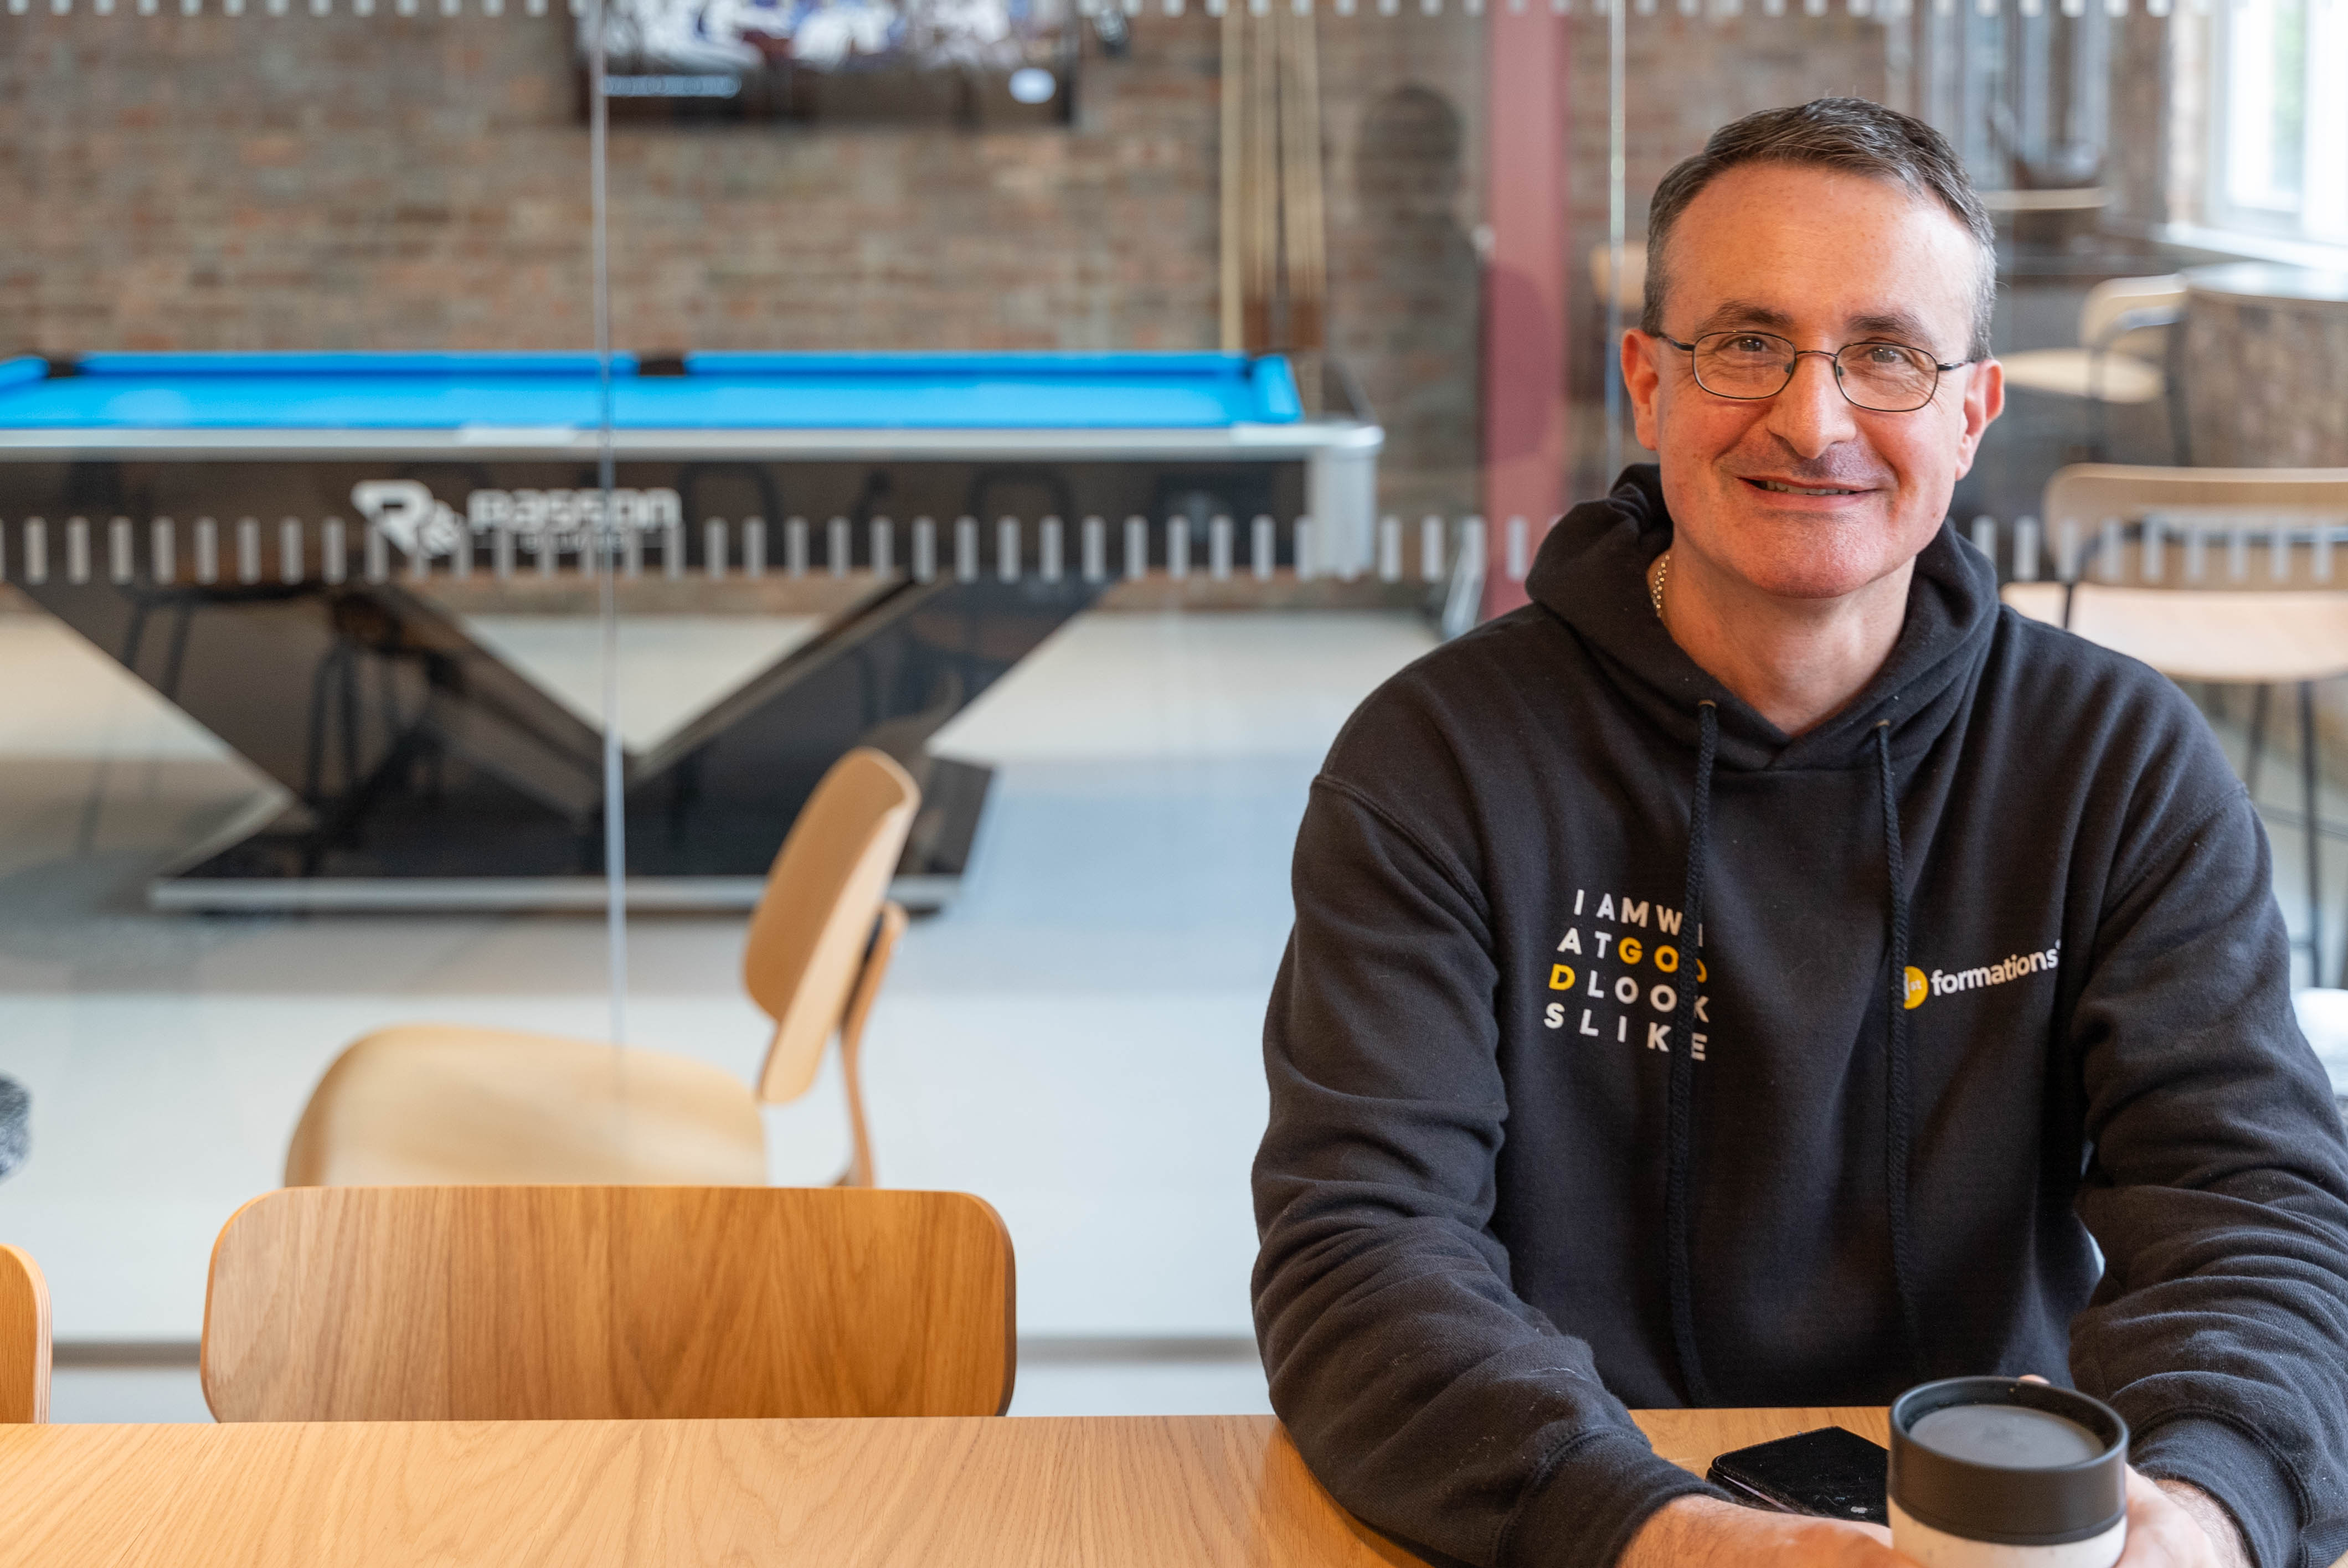 Nick, our Building Manager, sitting at our community table wearing his 1st Formations hoodie and having a coffee, with Games Room in the background.